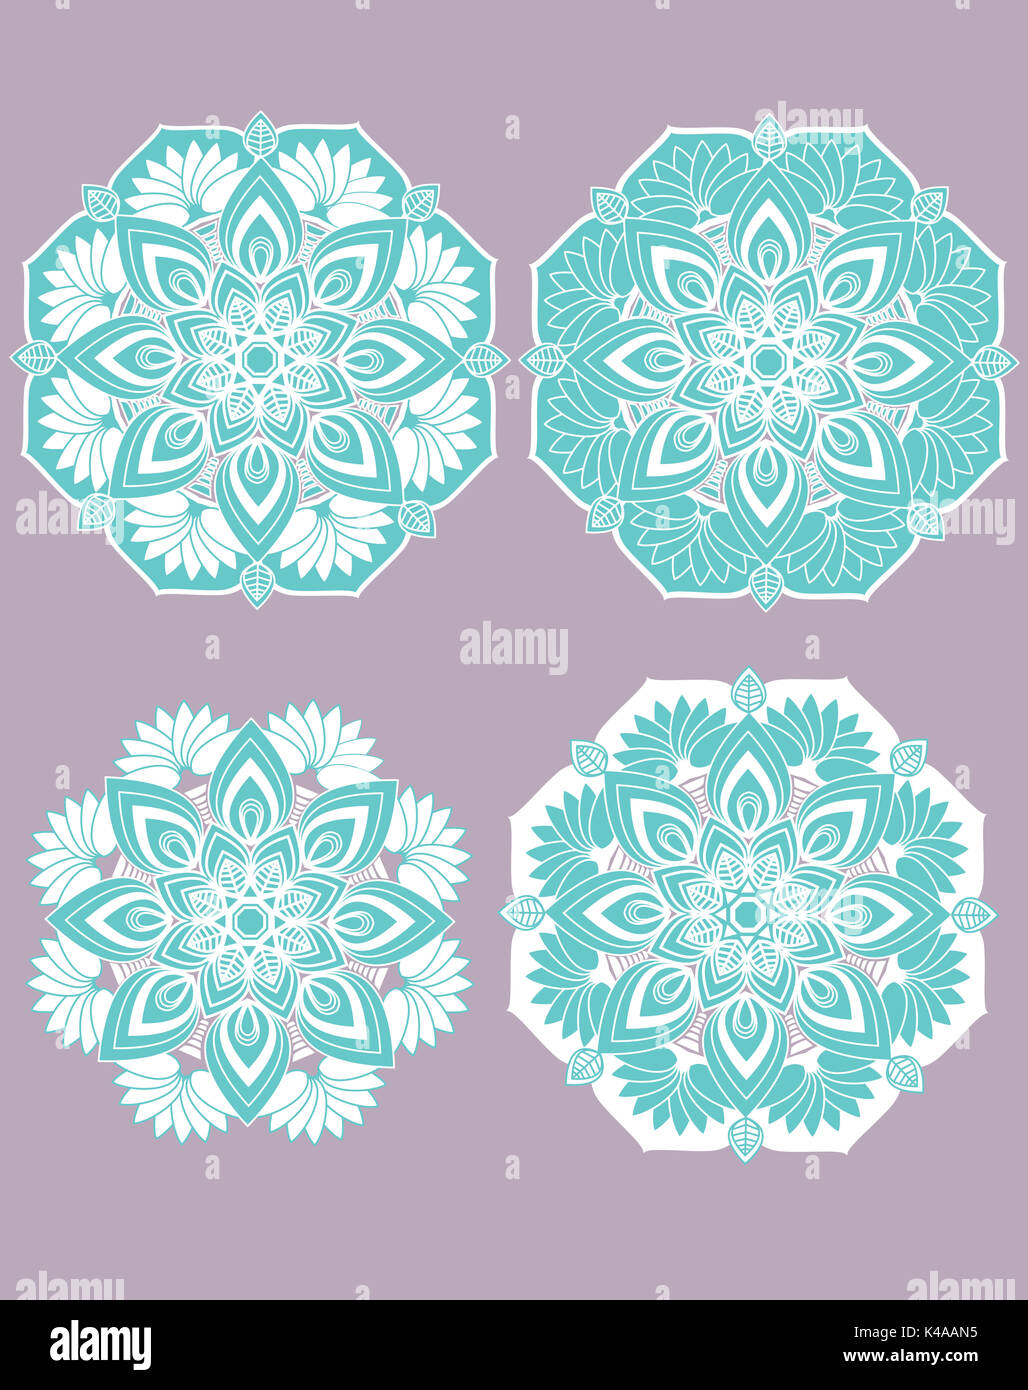 Decorative Chinese patterns with different was of filling in Stock Photo